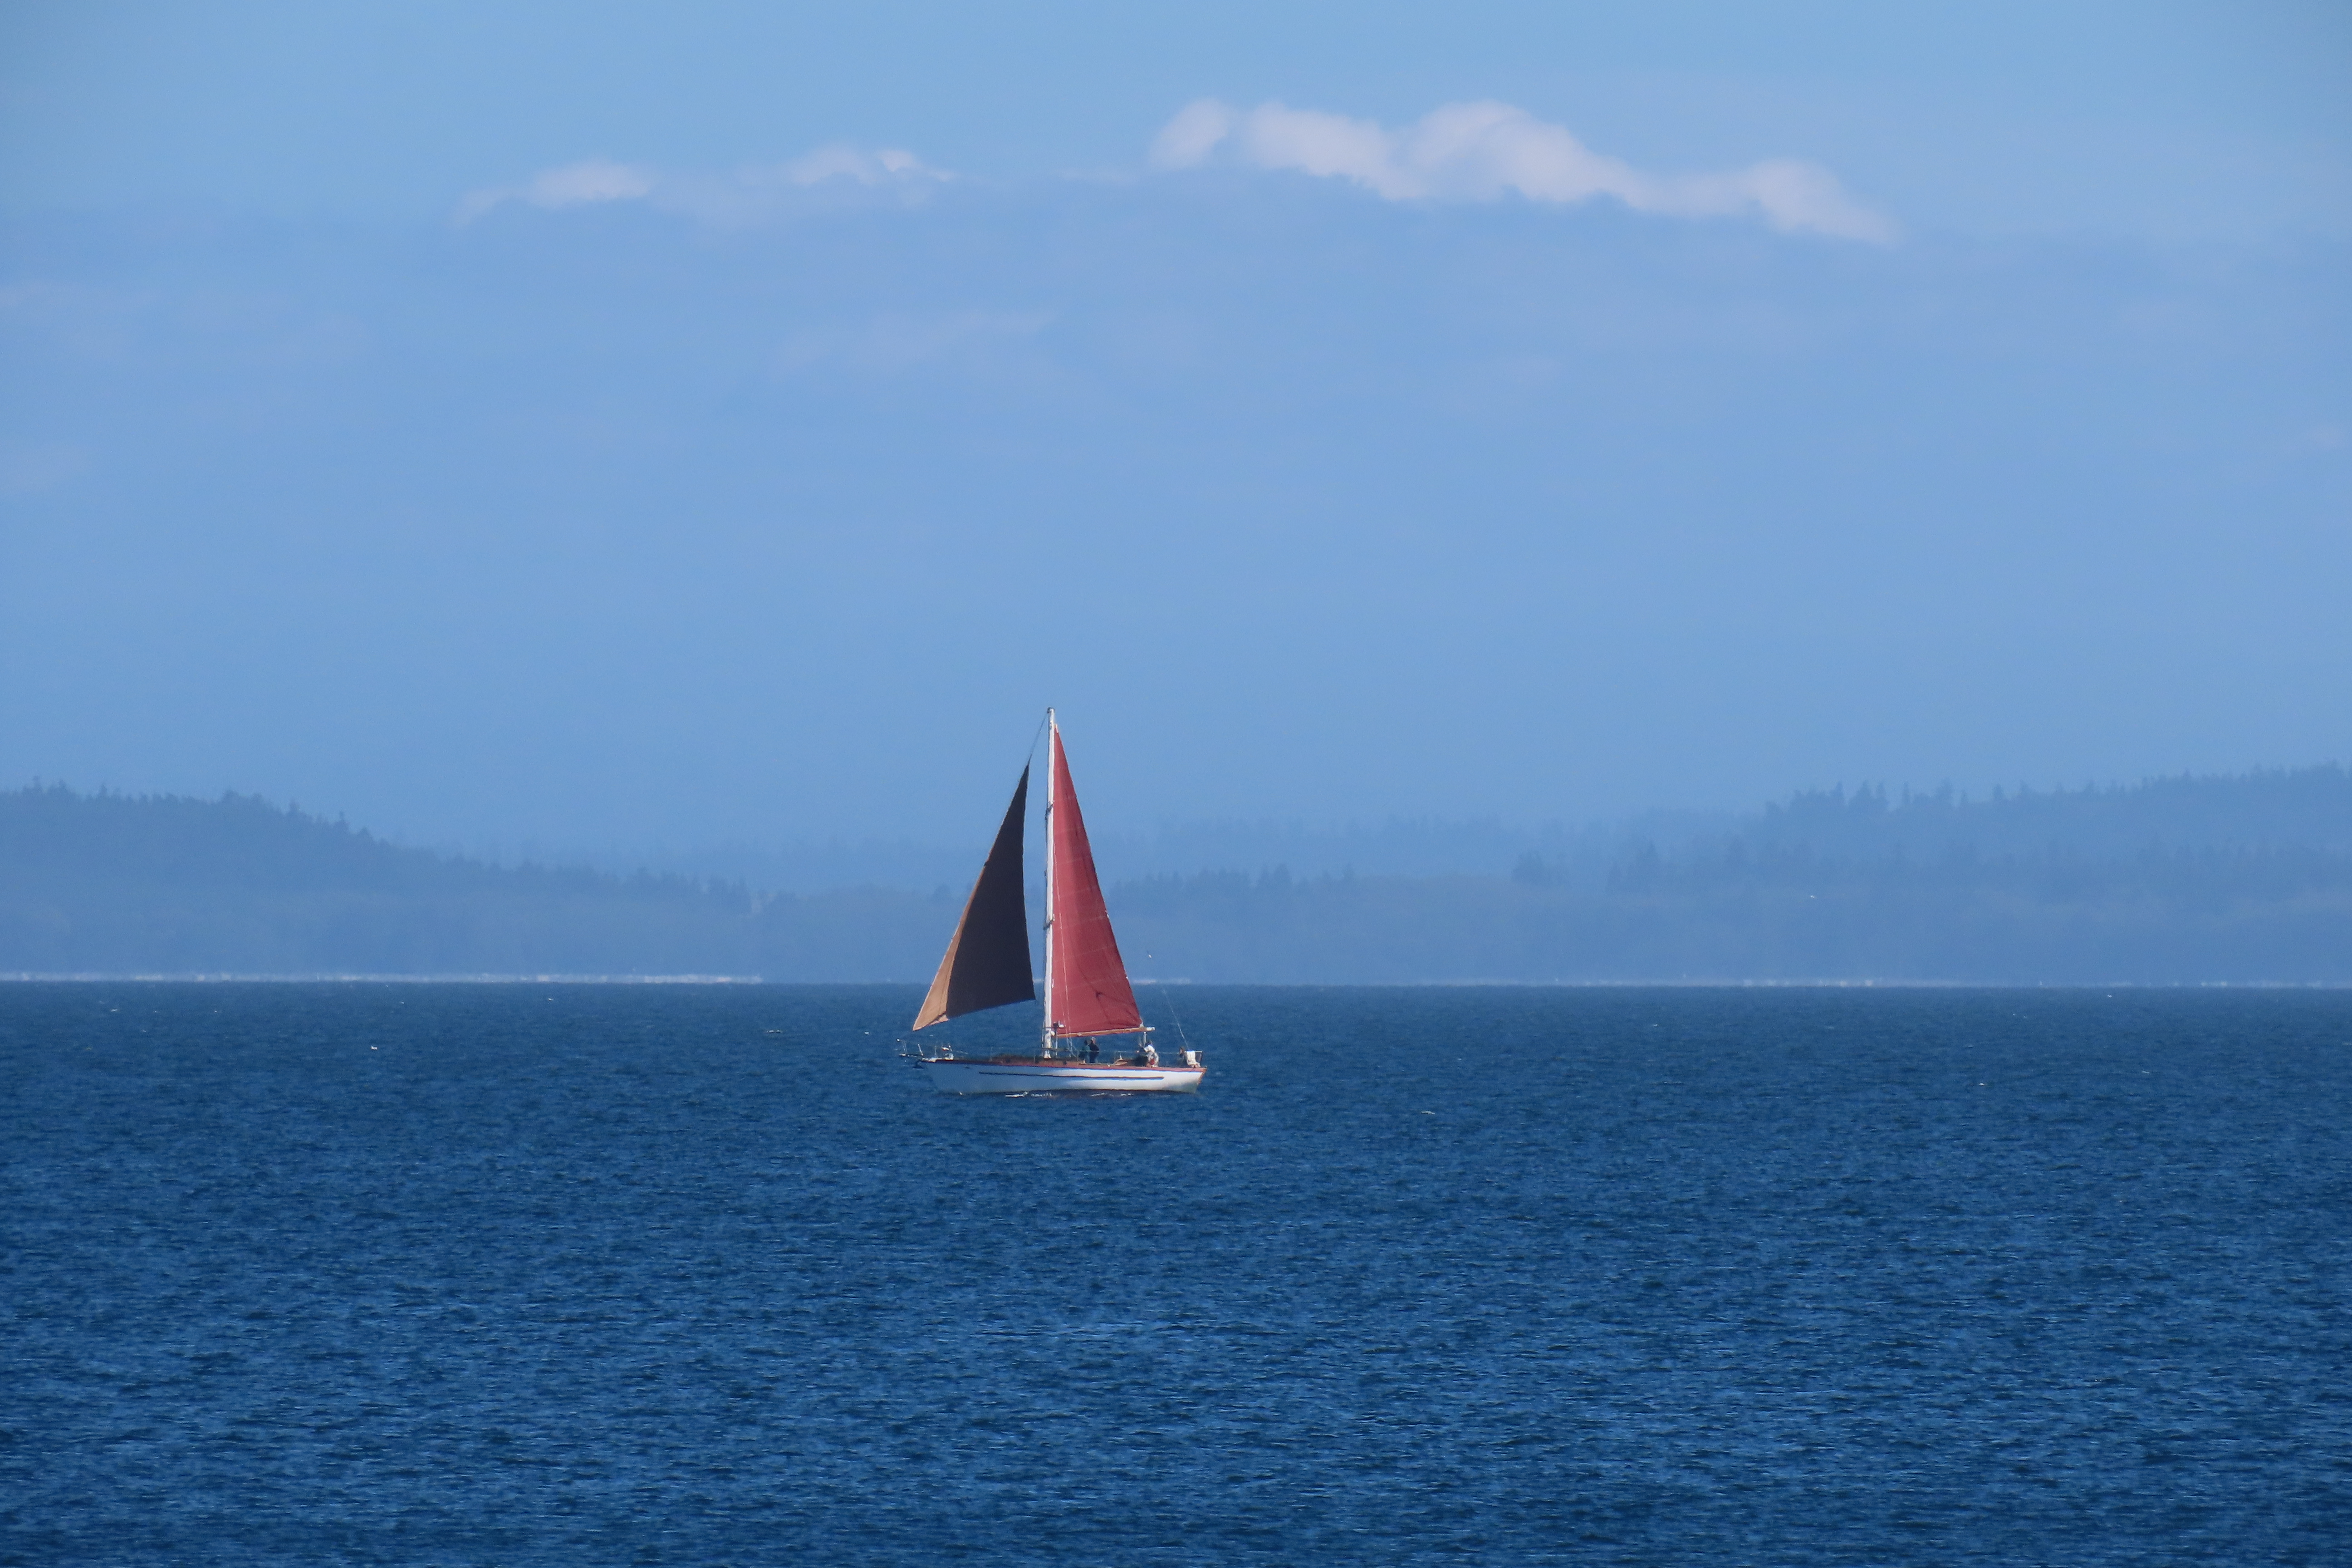 From Fort Wordern State Park in Port Townsend Washington